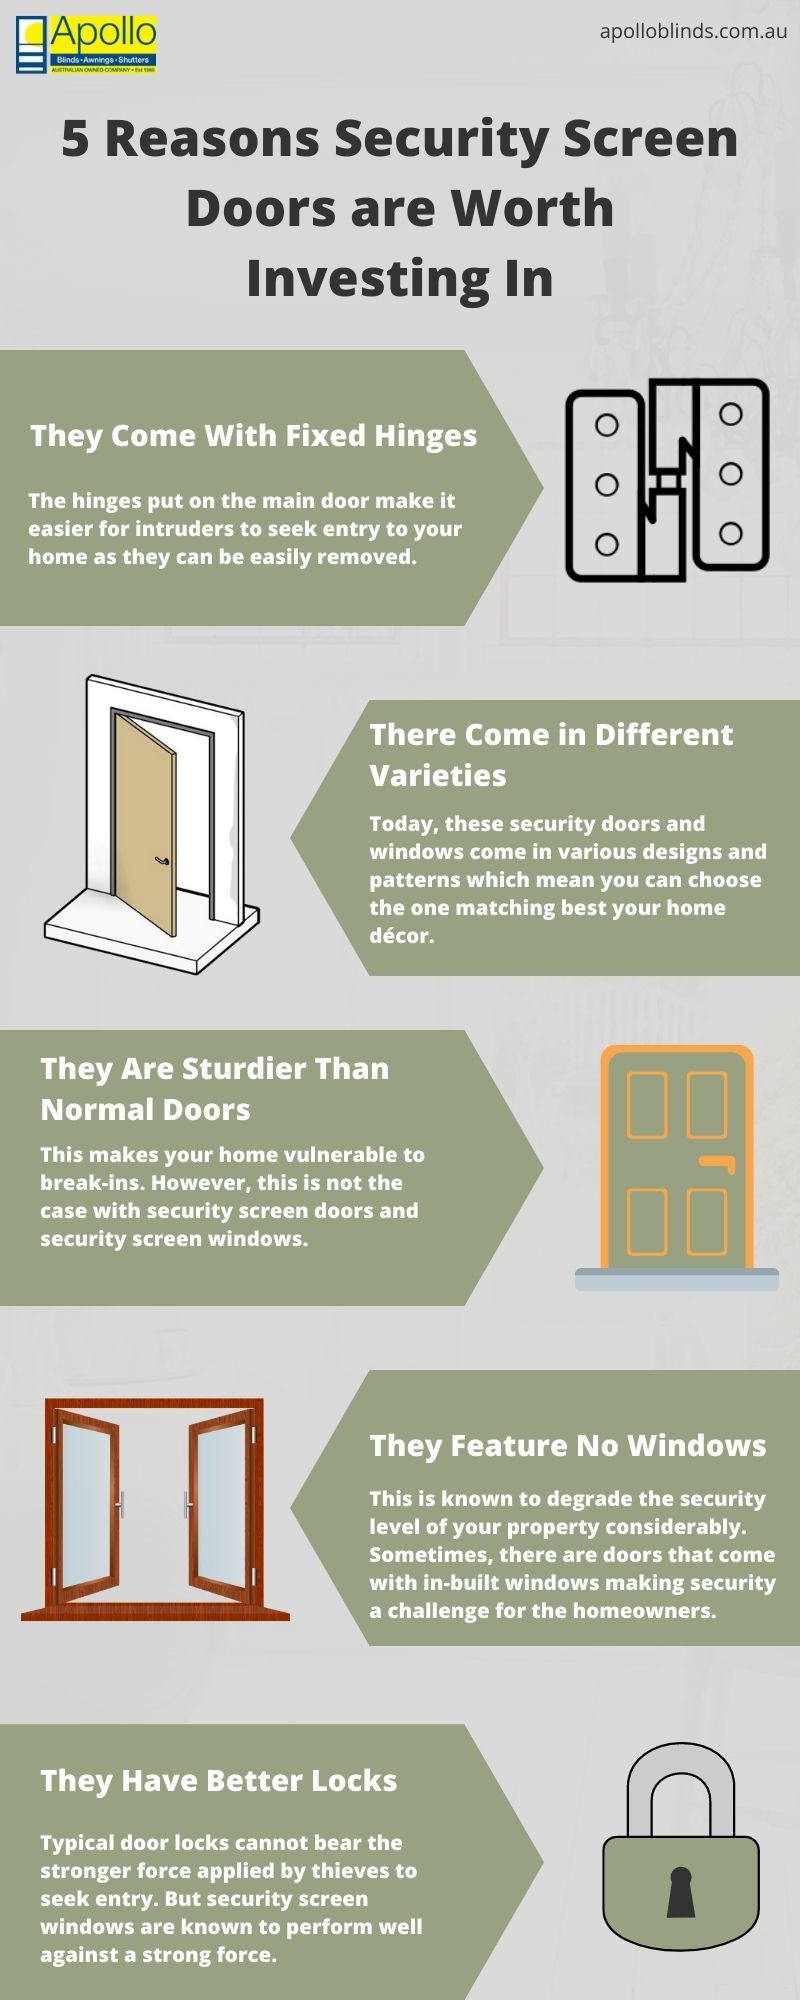 5 Reasons Security Screen Doors are Worth Investing In